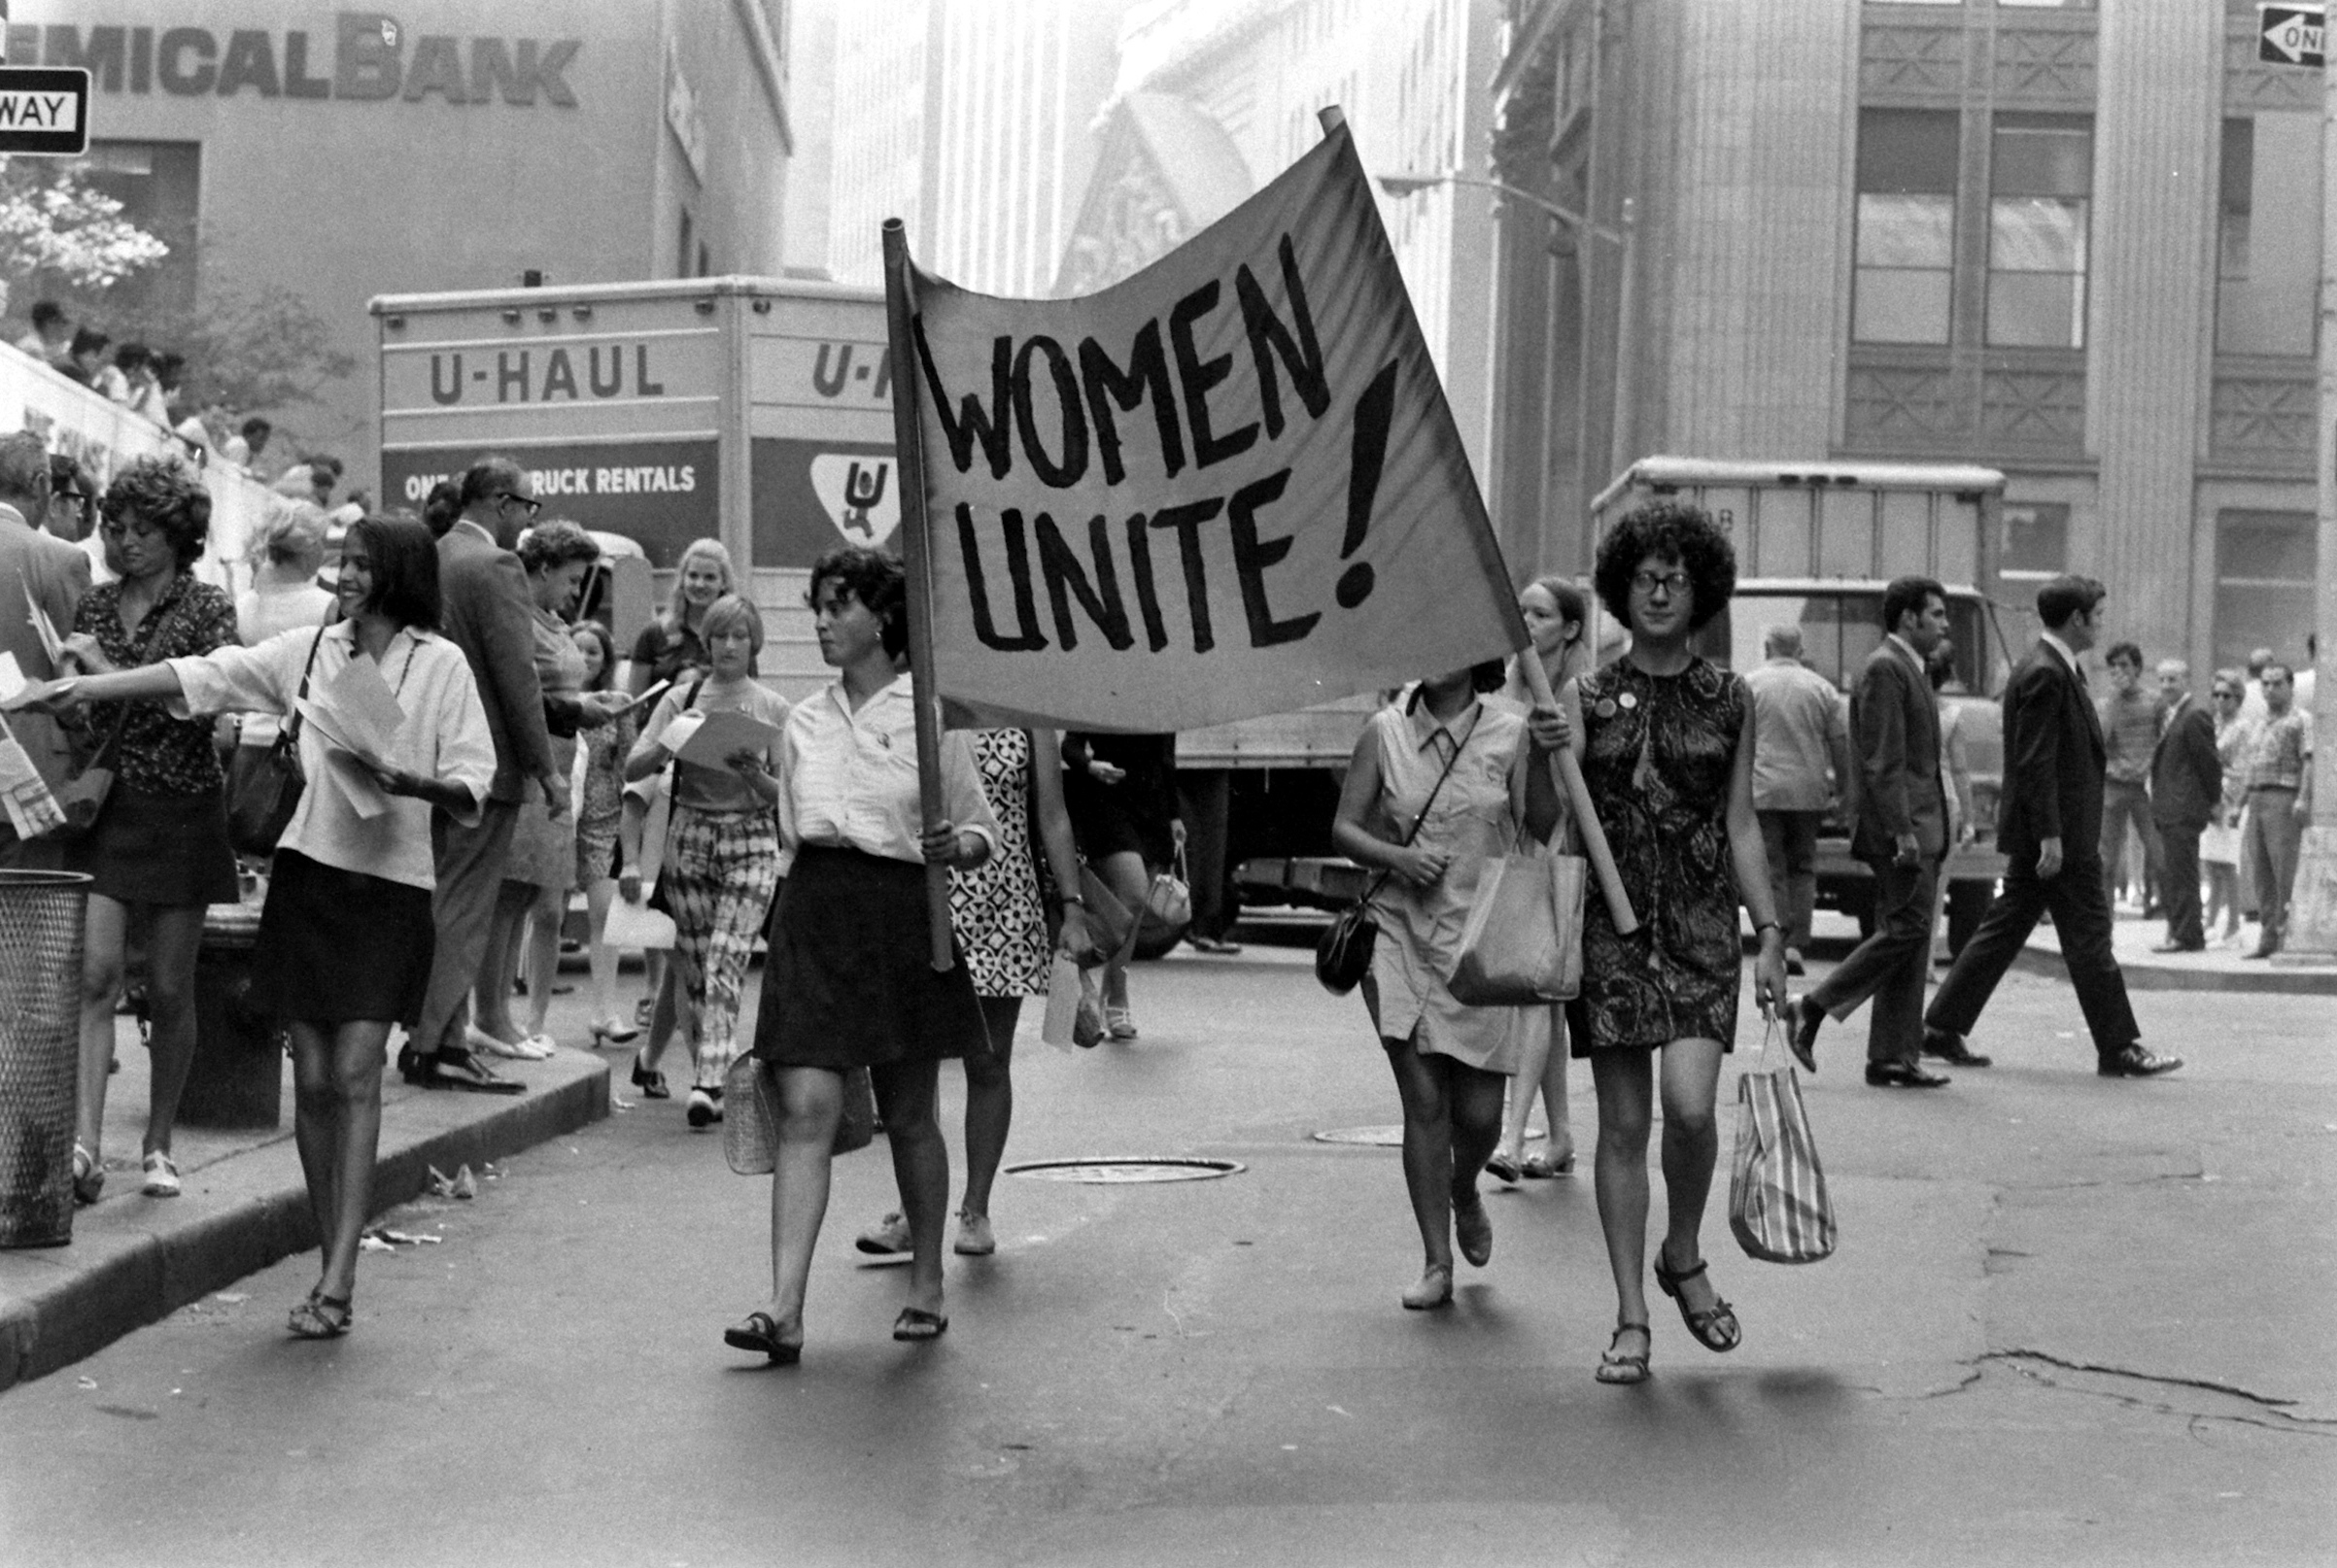 Women marching at the Women's Strike for Equality, New York, N.Y., Aug. 26, 1970. (John Olson—The LIFE Picture Collection via Getty Images)